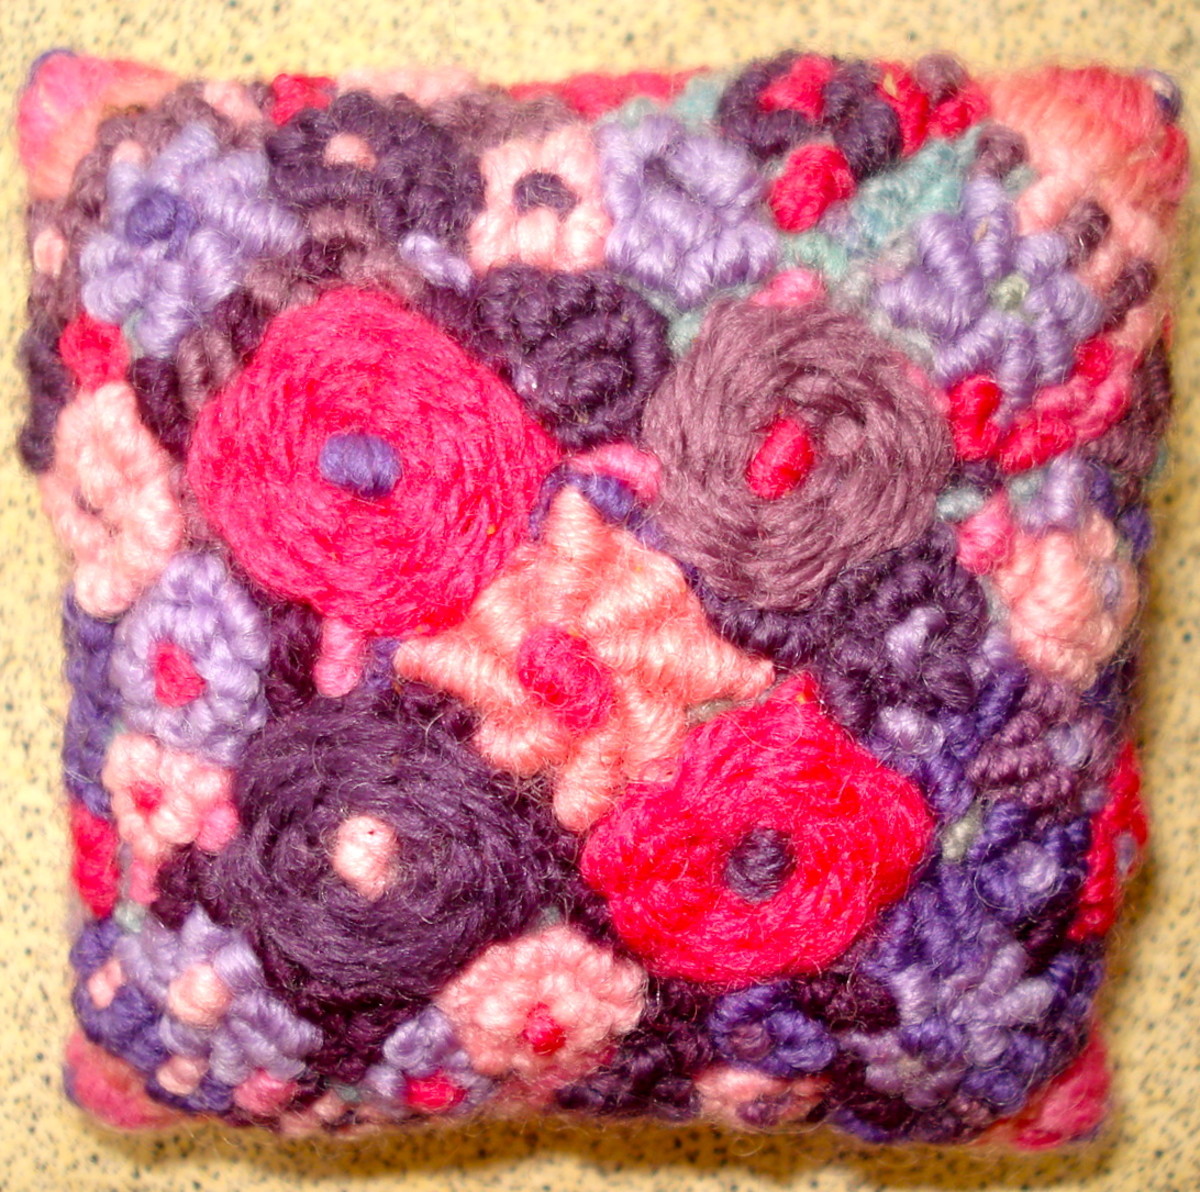 The Top of the Completed Pincushion